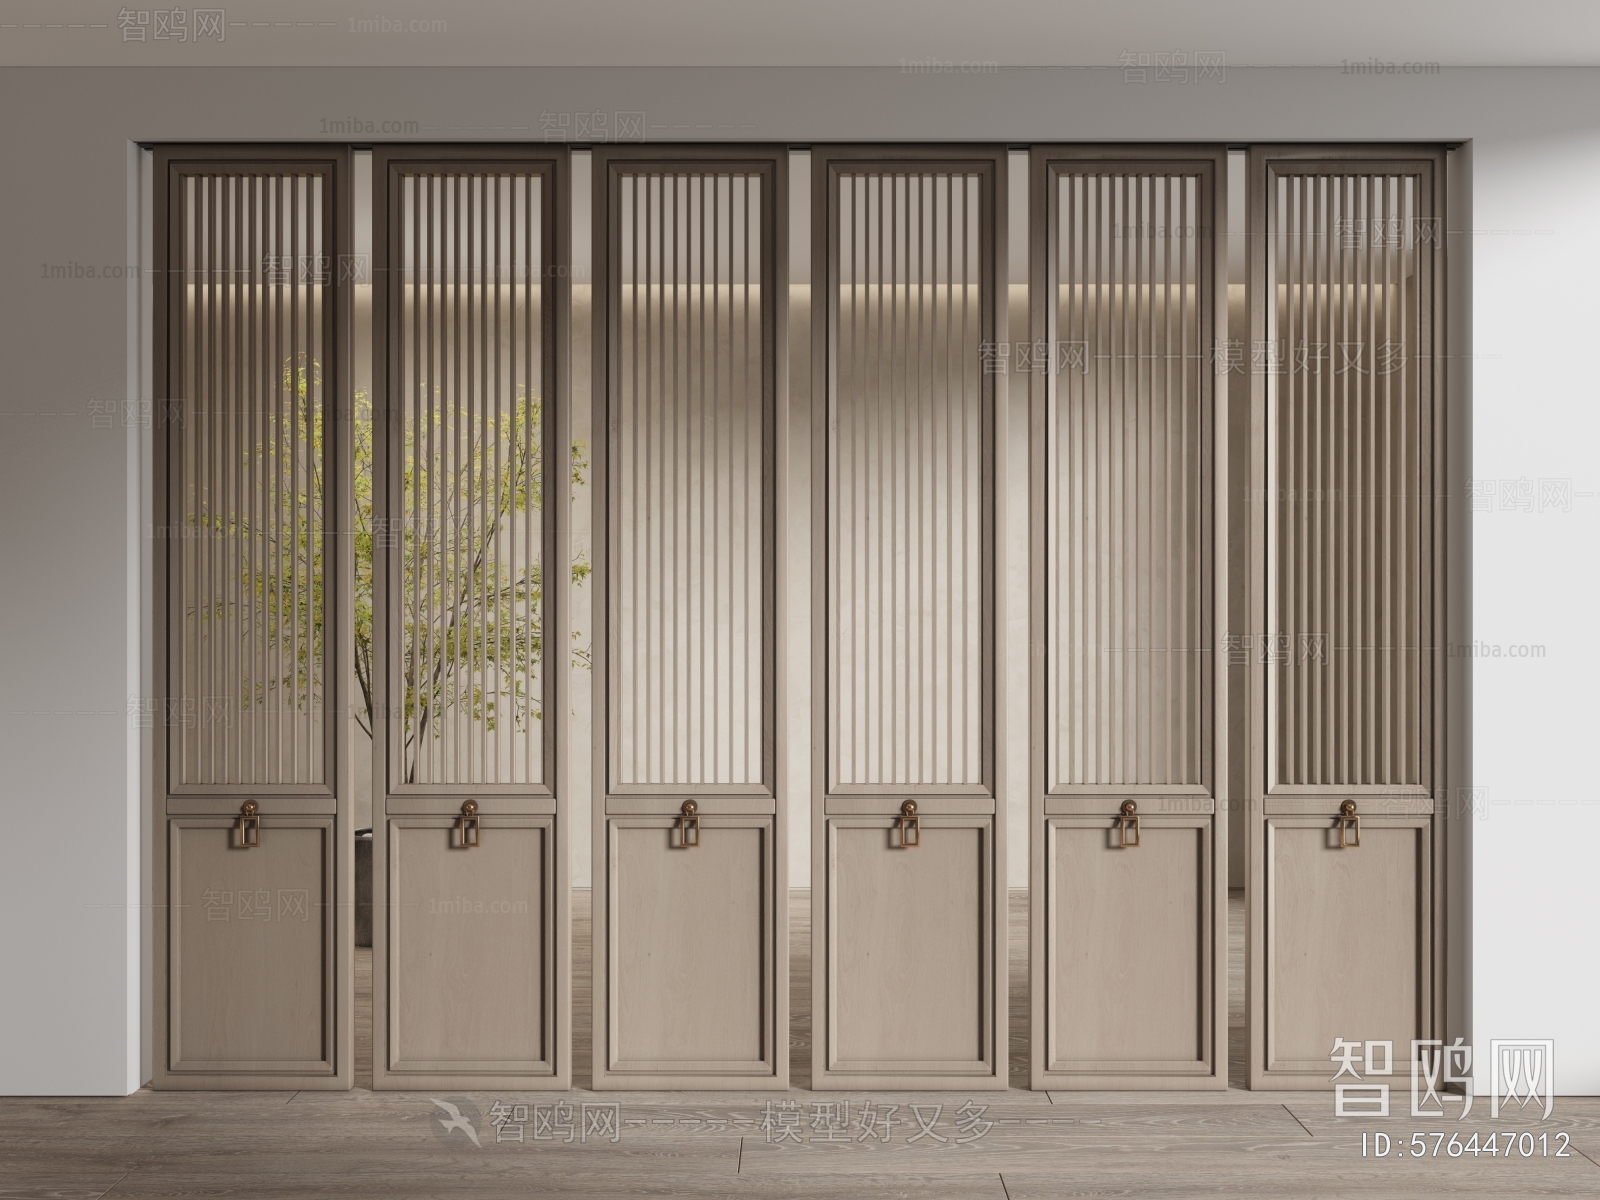 New Chinese Style Wooden Screen Partition